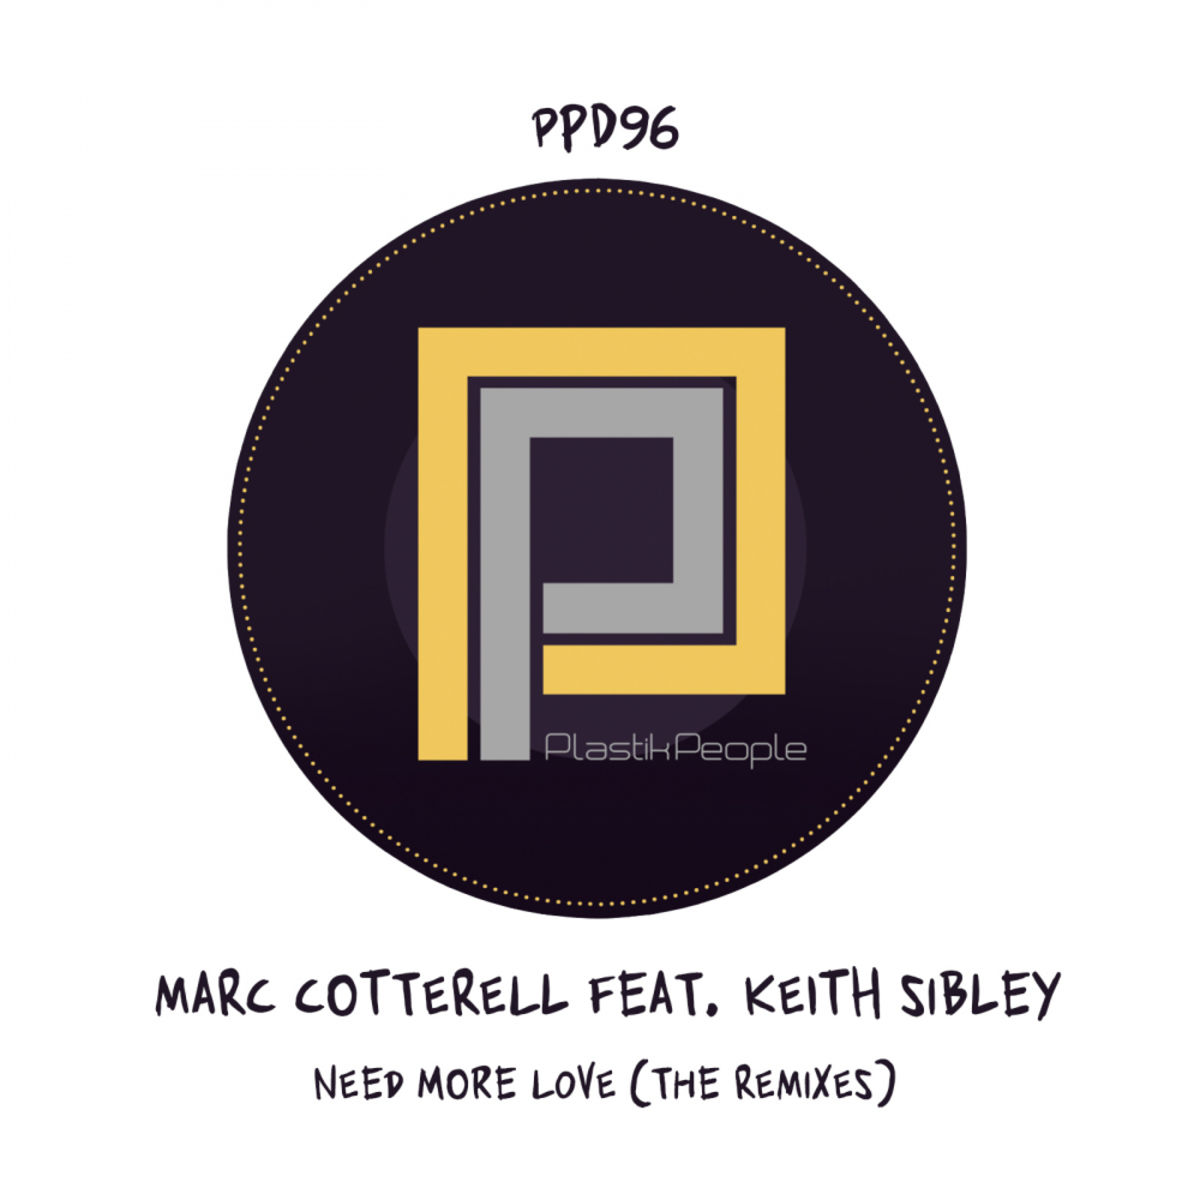 Marc Cotterell - Need More Love (The Remixes) / Plastik People Digital